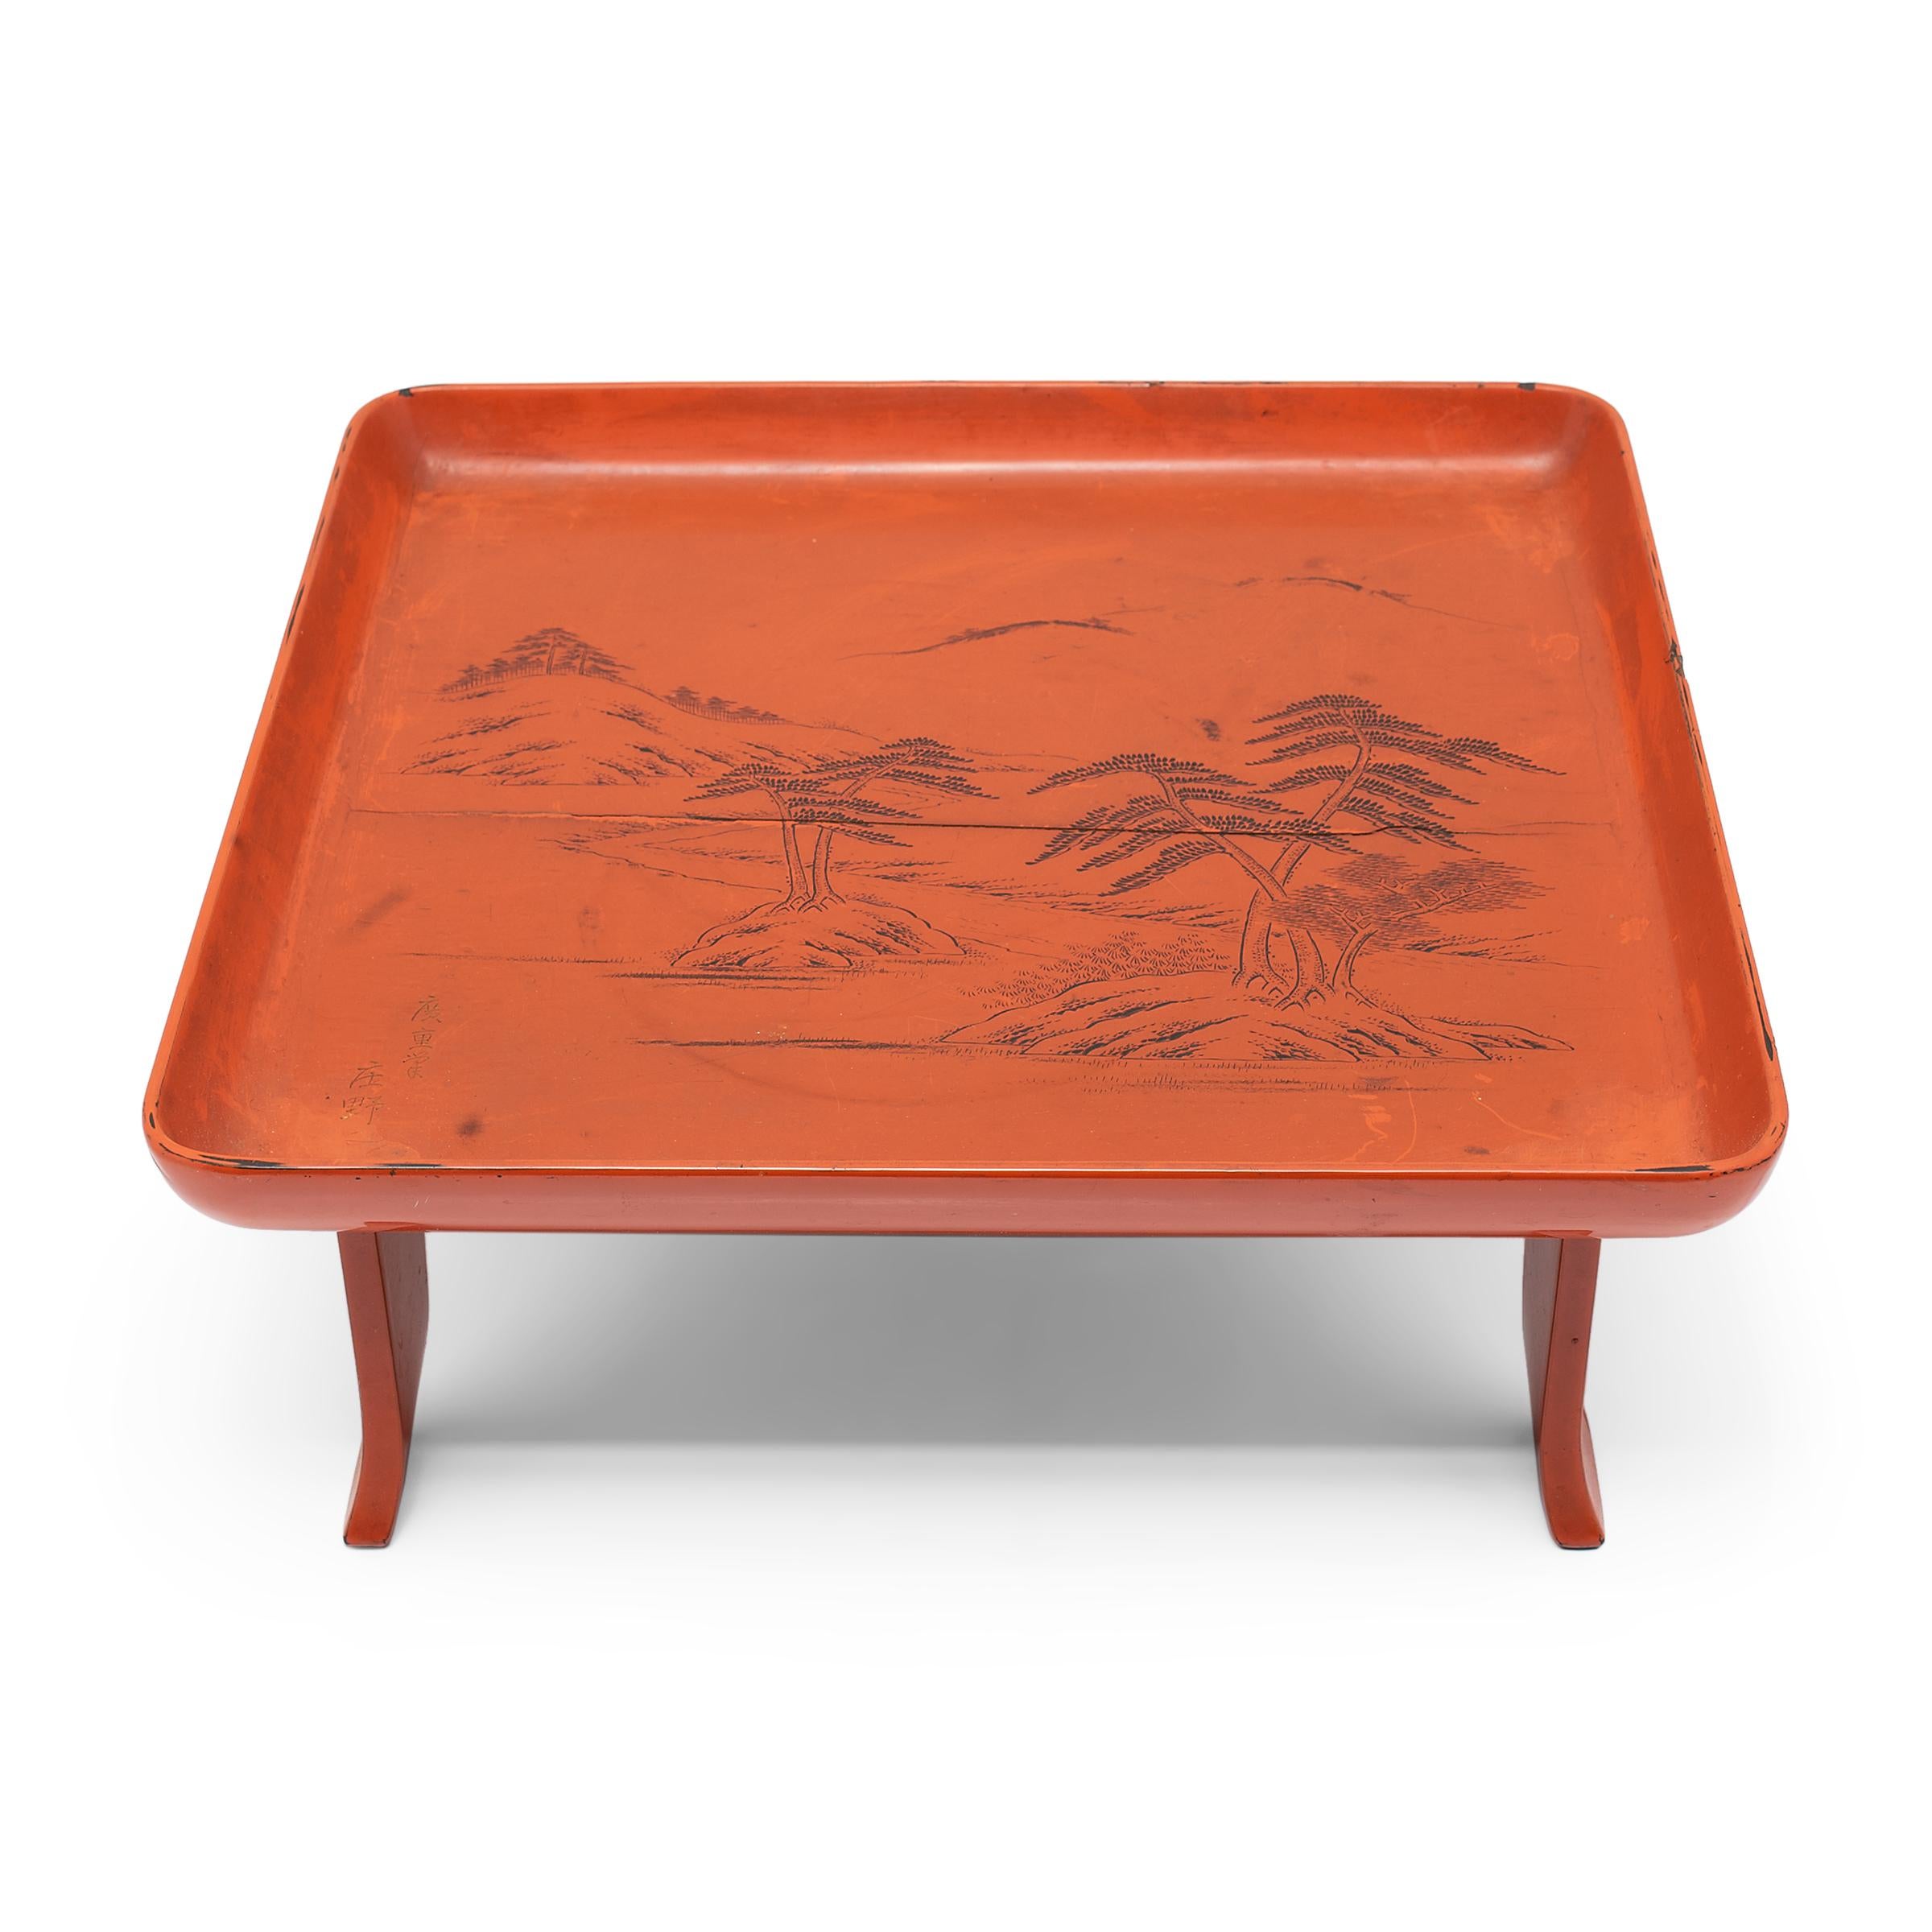 This Japanese serving tray exemplifies the refined style of Meiji-era lacquerware. Elevated by a splayed footed base, the tray has a shallow, square top with raised sides and rounded corners. The tray top is decorated with a serene sansui landscape,